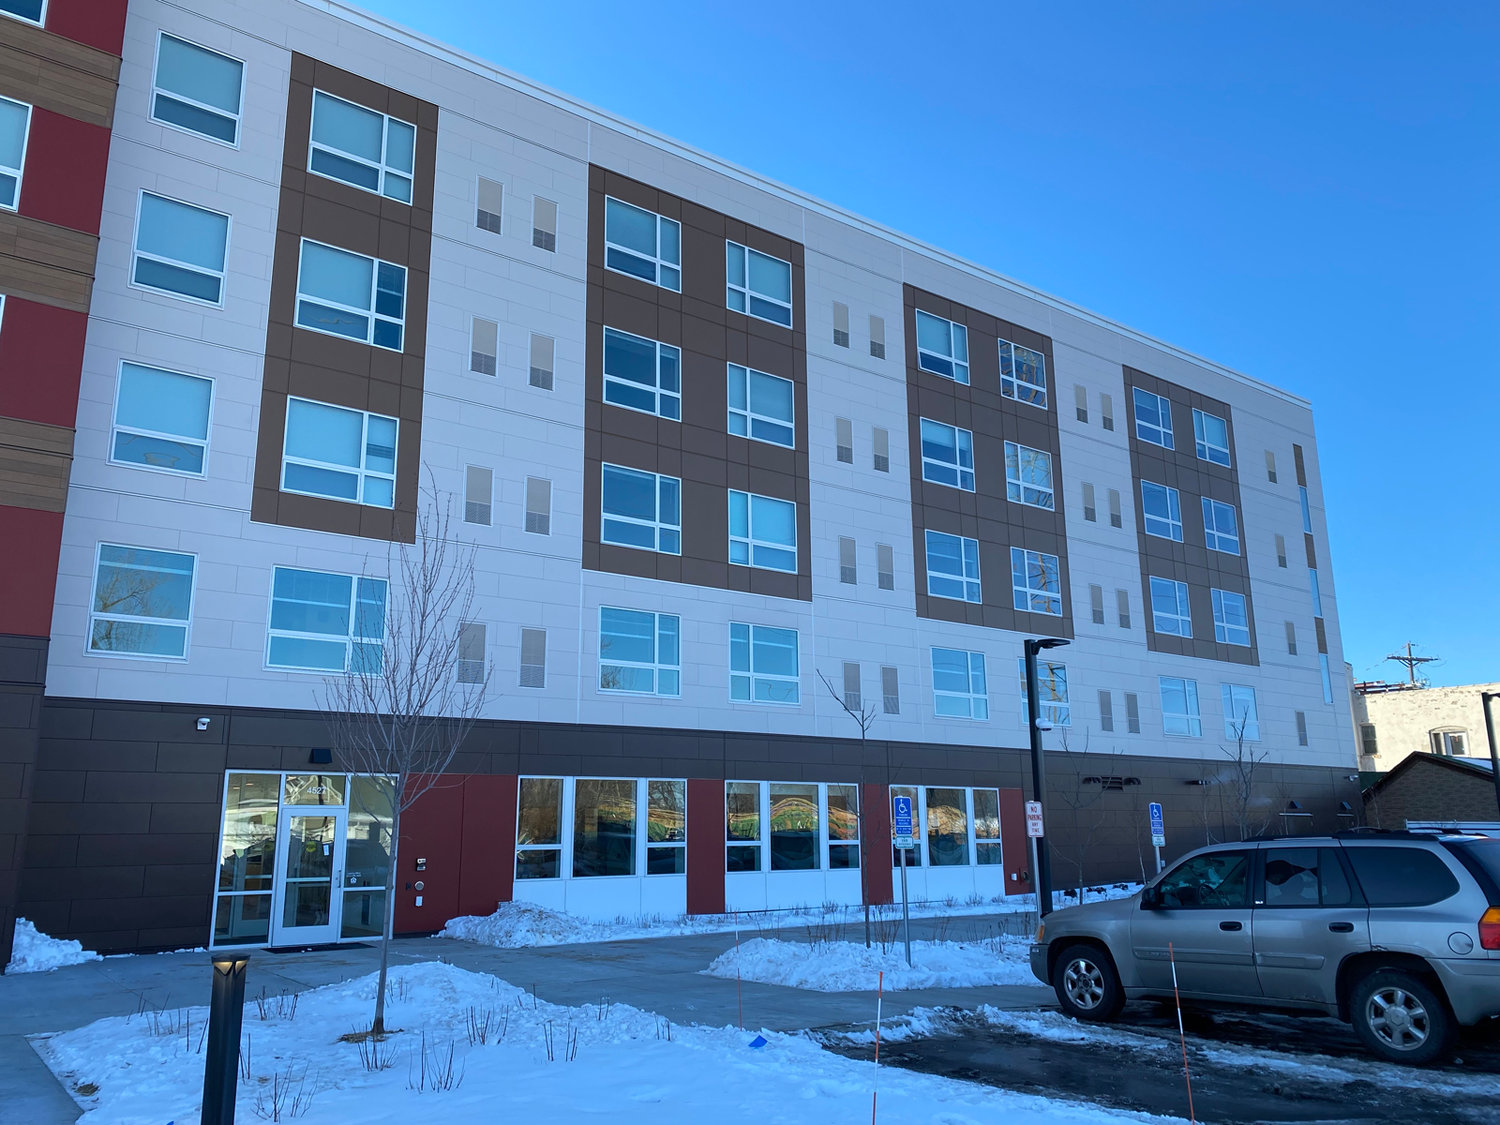 Amber Apartments is a “very affordable” apartment building at 4527 Hiawatha Ave.